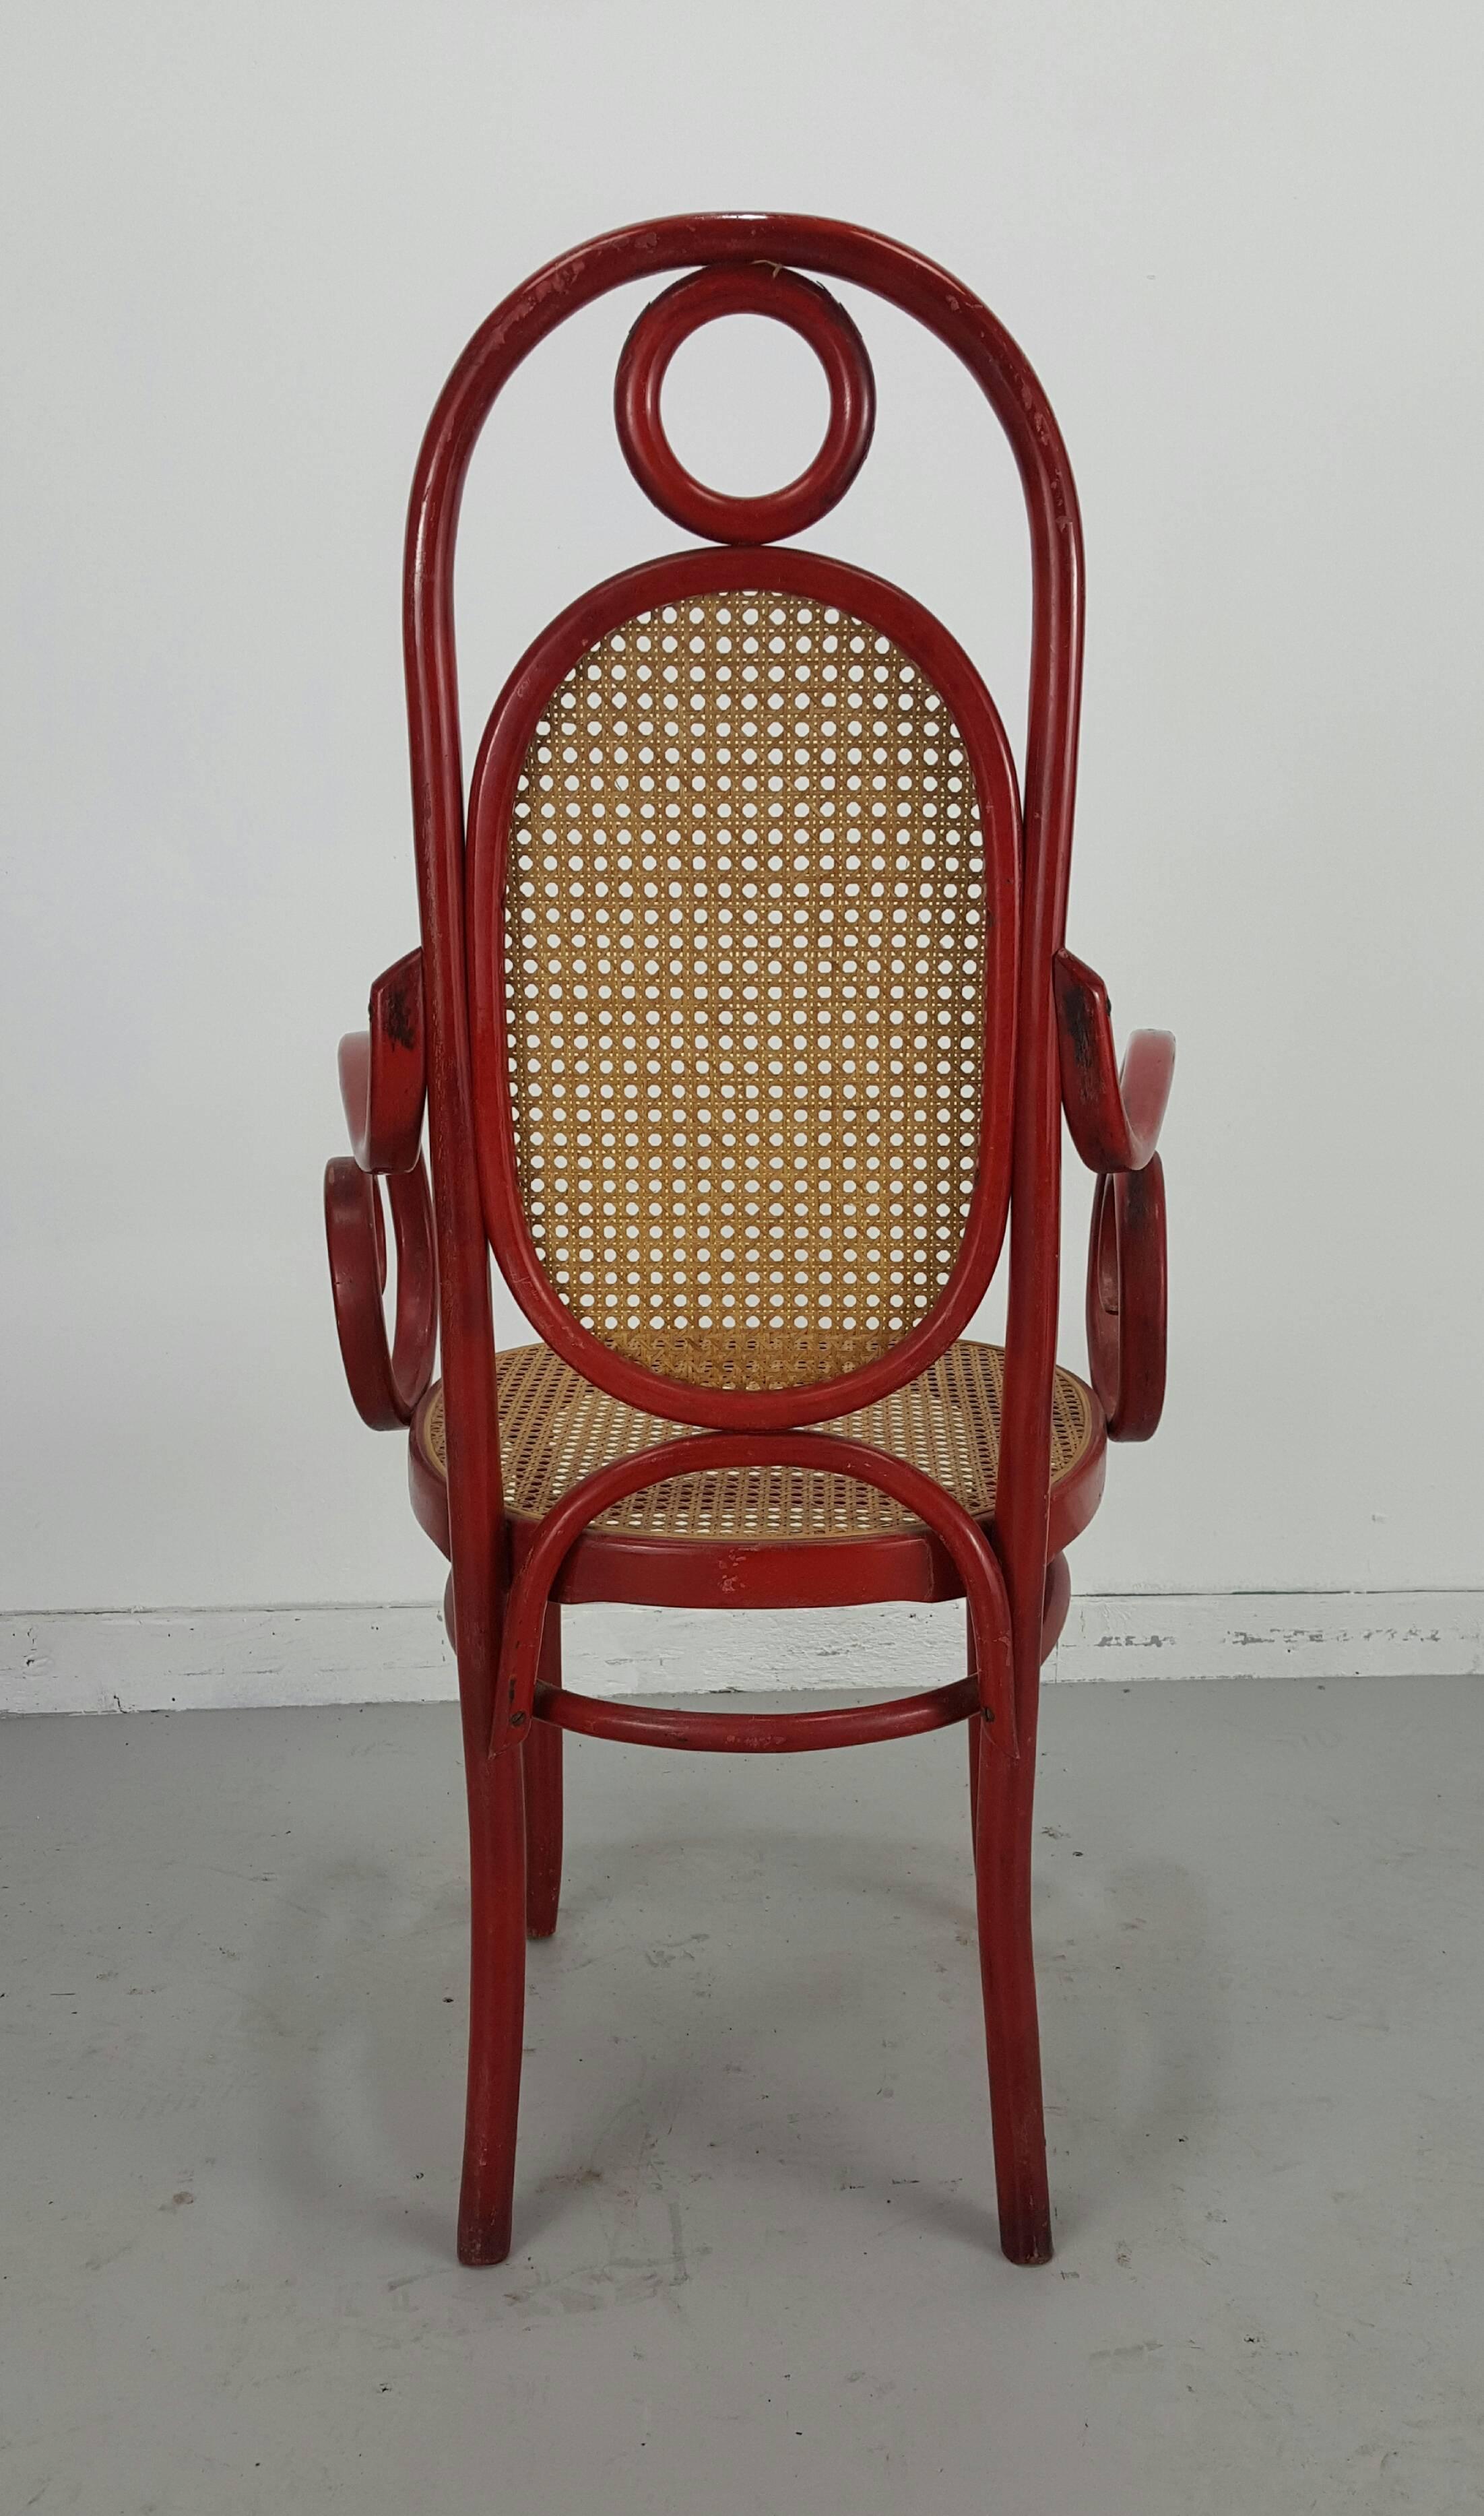 This model 17, bentwood side chair with a cane seat and back was designed by Michael Thonet for his own company in the 1860s. This example was produced in the 1970s and is in a very good and untouched vintage condition. Retains original red aniline